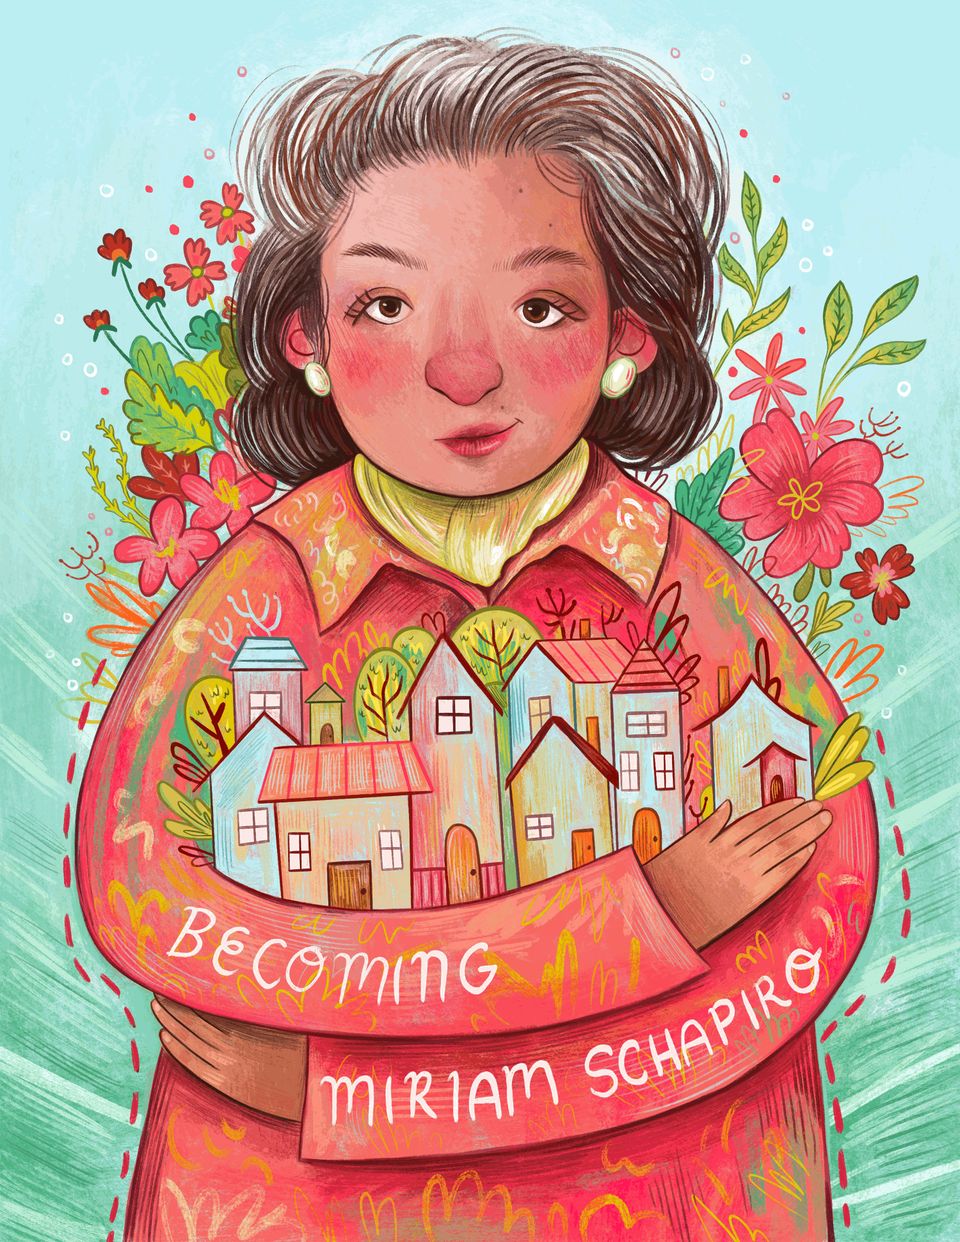 Miriam Schapiro stands against a light blue-green background with pink flowers, holding a village of small, colorful houses in her arms. Text reads: "Becoming Miriam Schapiro."